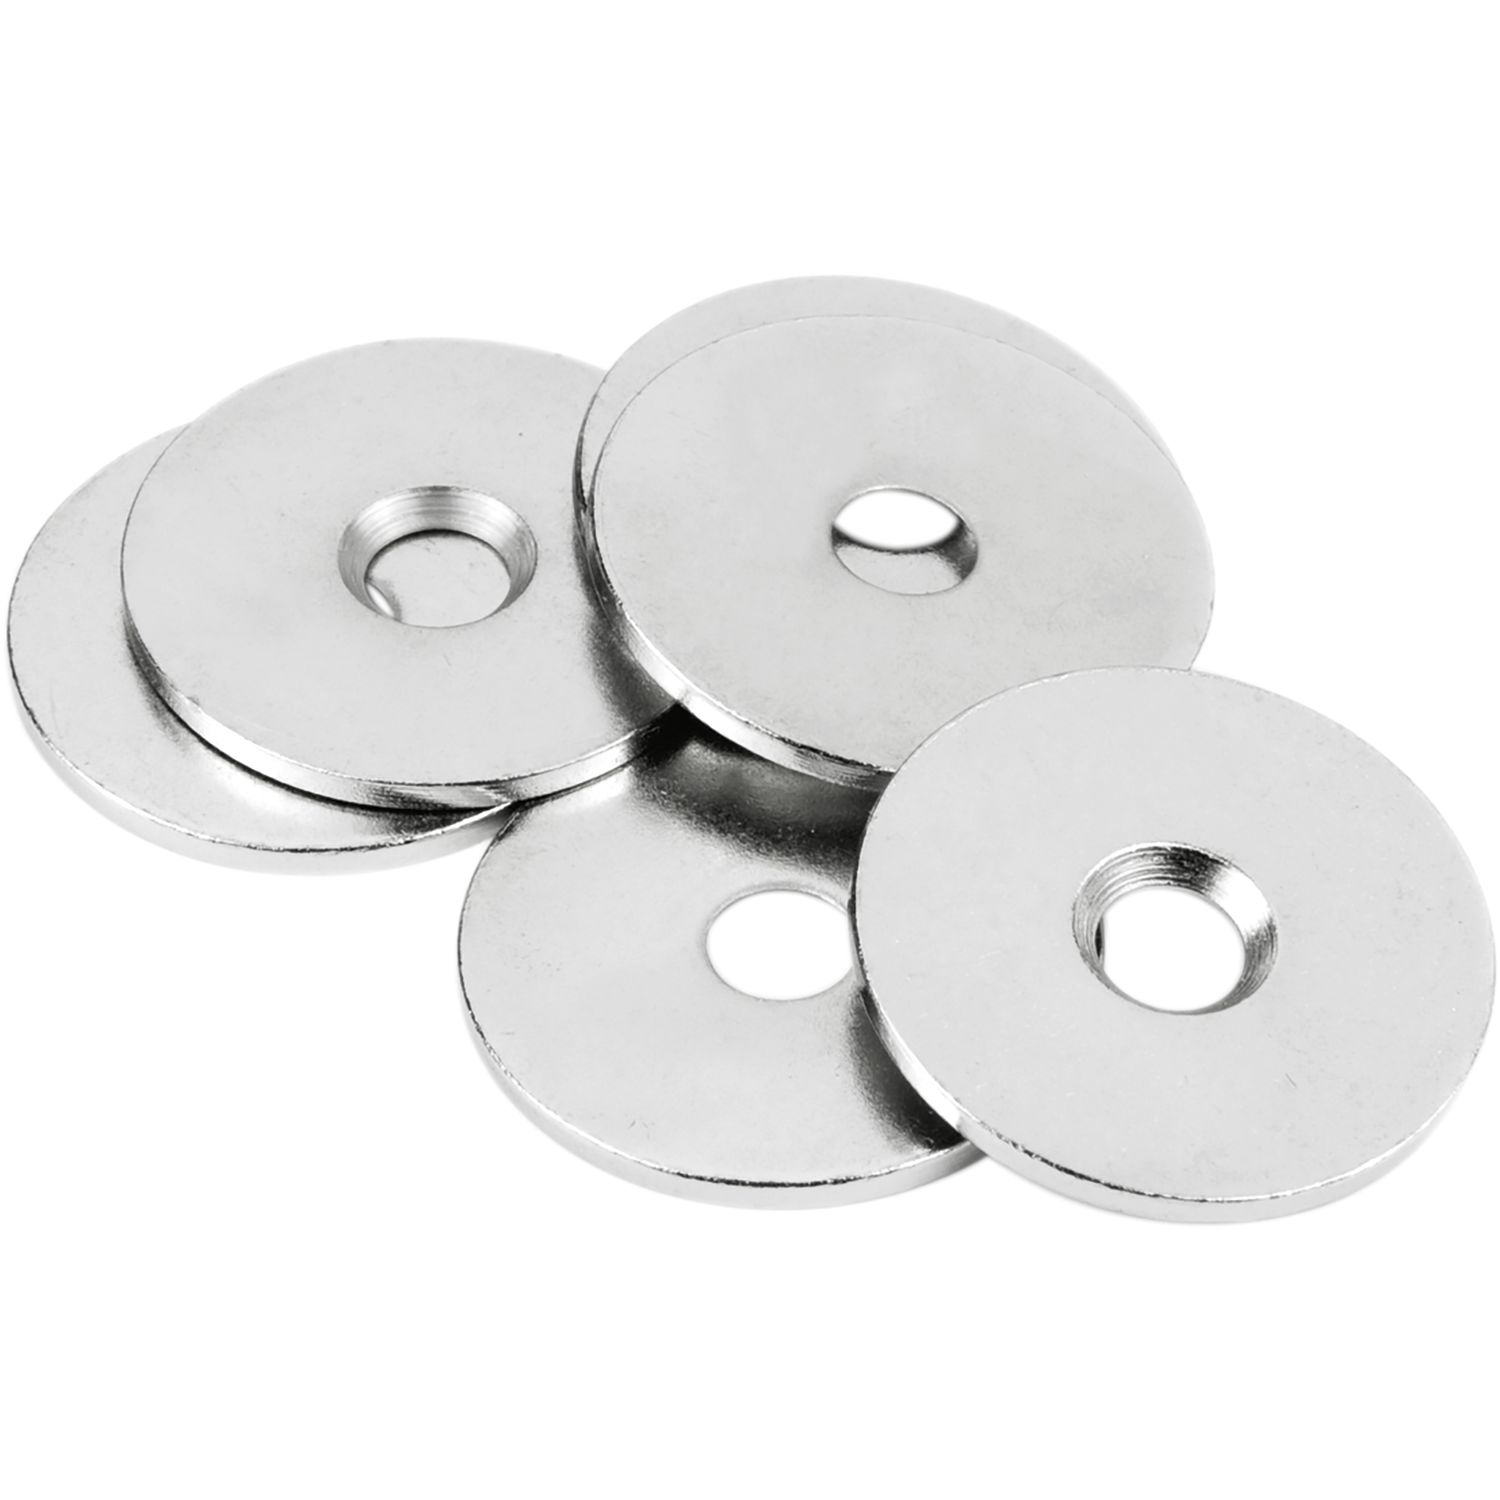 Screw-on bases Steel discs fixing screws Disc with countersunk borehole, as a counterpart to magnets, Metal plate, Surfaces for magnets screw-on metal discs, Cups, Discs and Washers